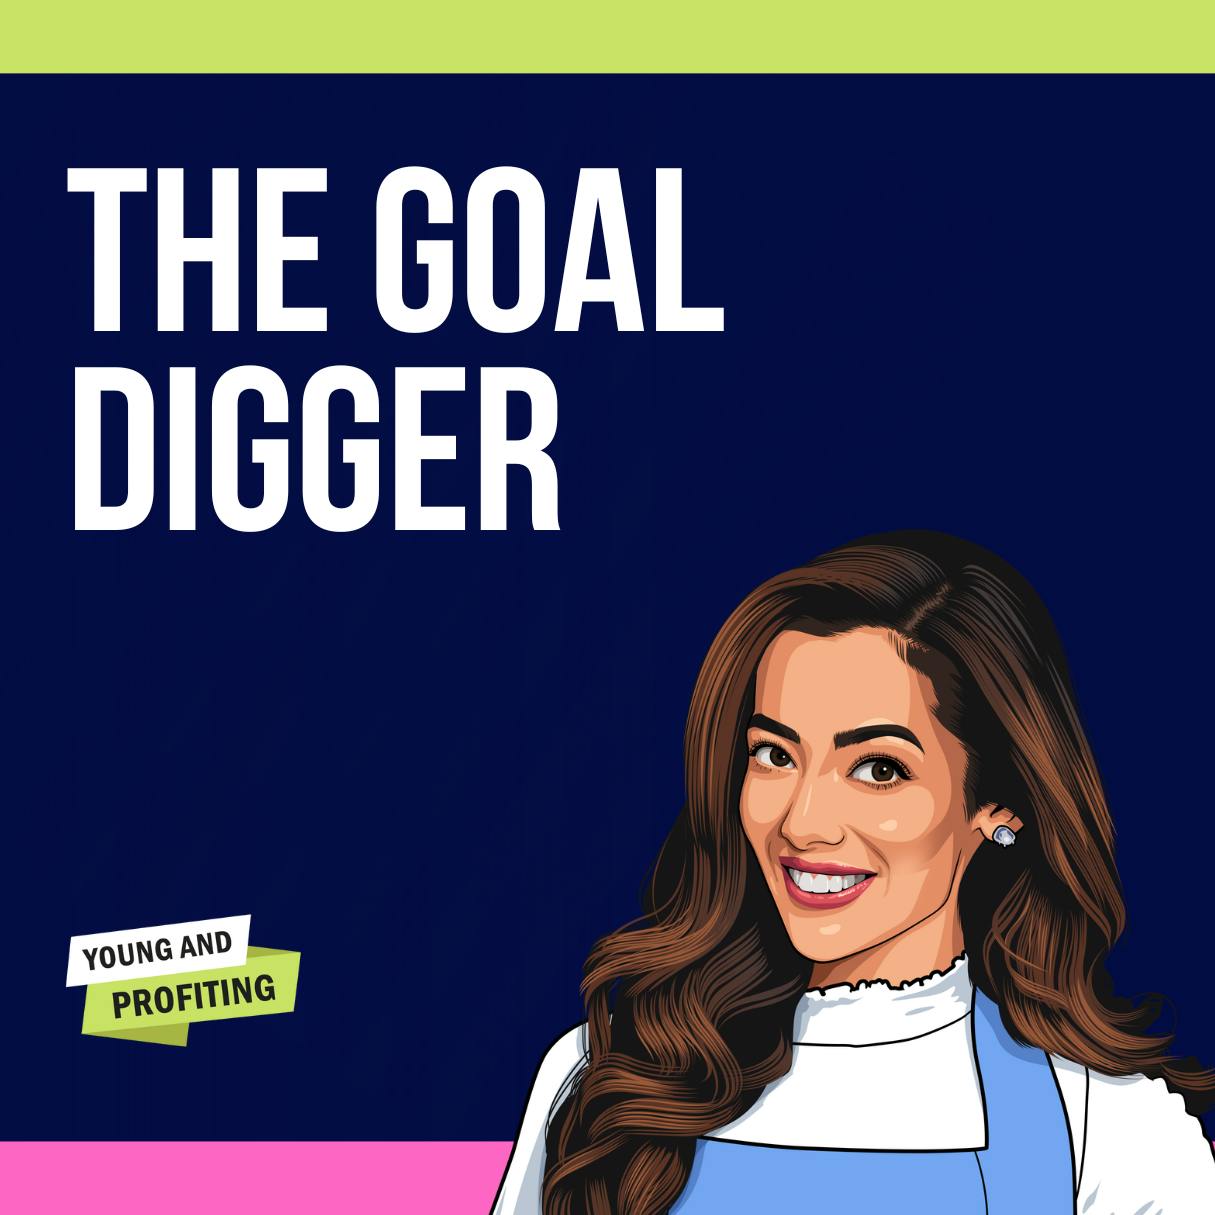 Hala Taha: Your Secret Weapon, How Leveraging LinkedIn Can Grow Your Brand and Generate Leads | The Goal Digger by Hala Taha | YAP Media Network